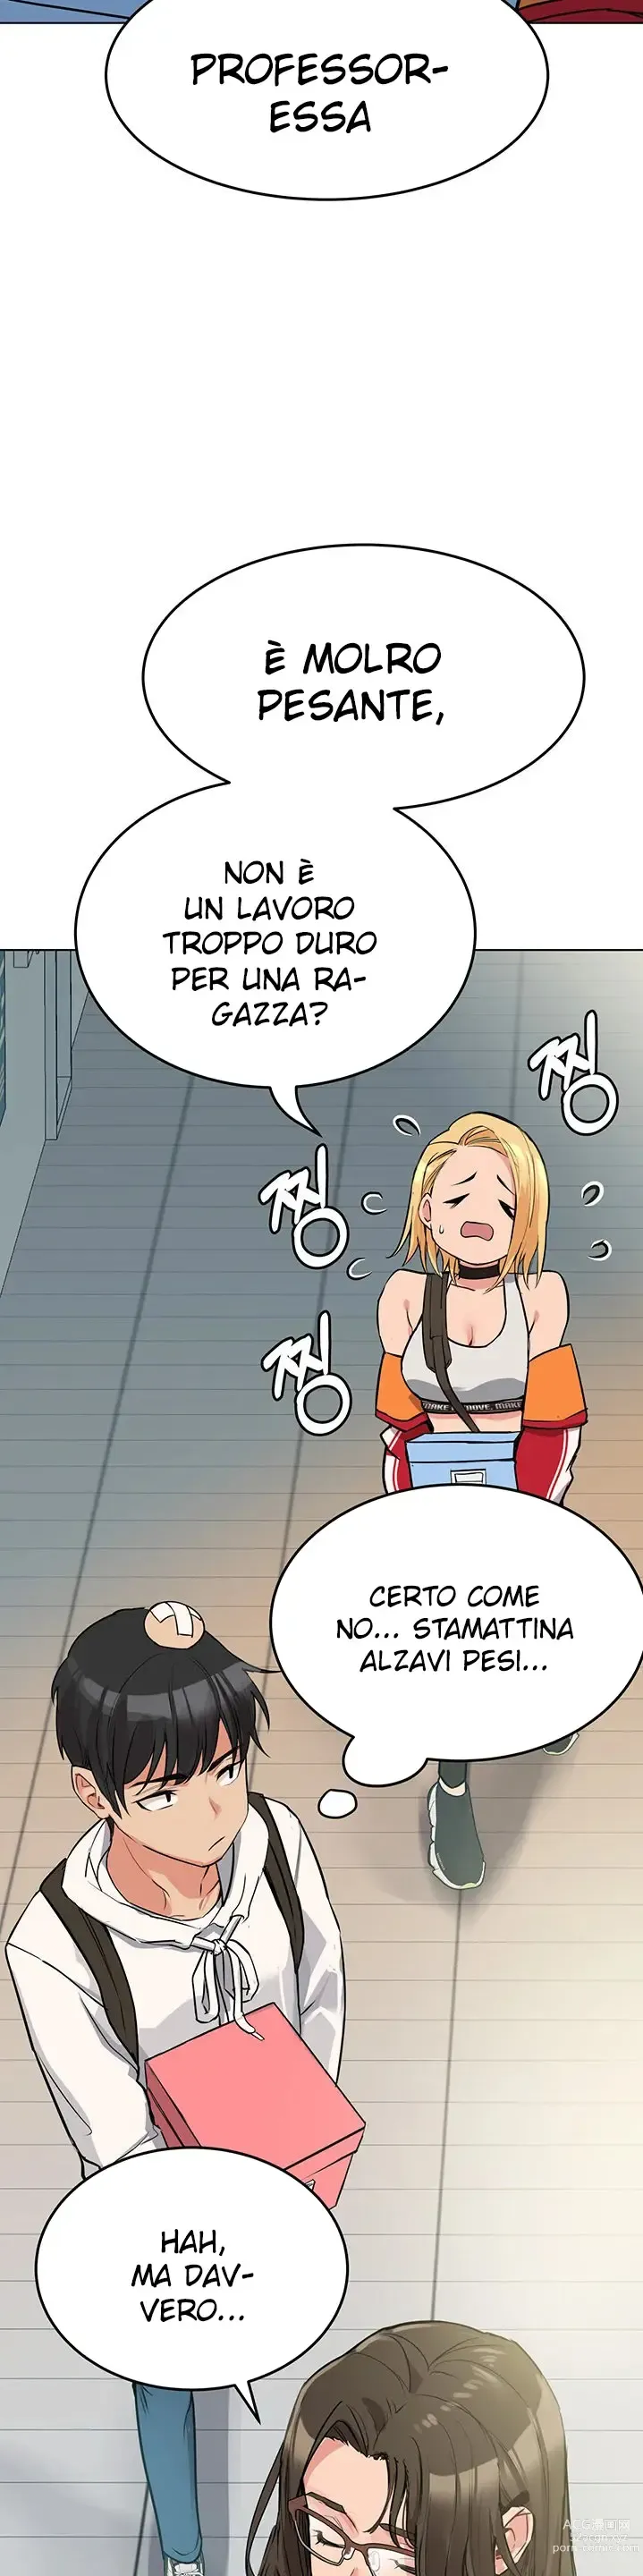 Page 34 of manga Keep It a Secret From Your Mother capitolo 02